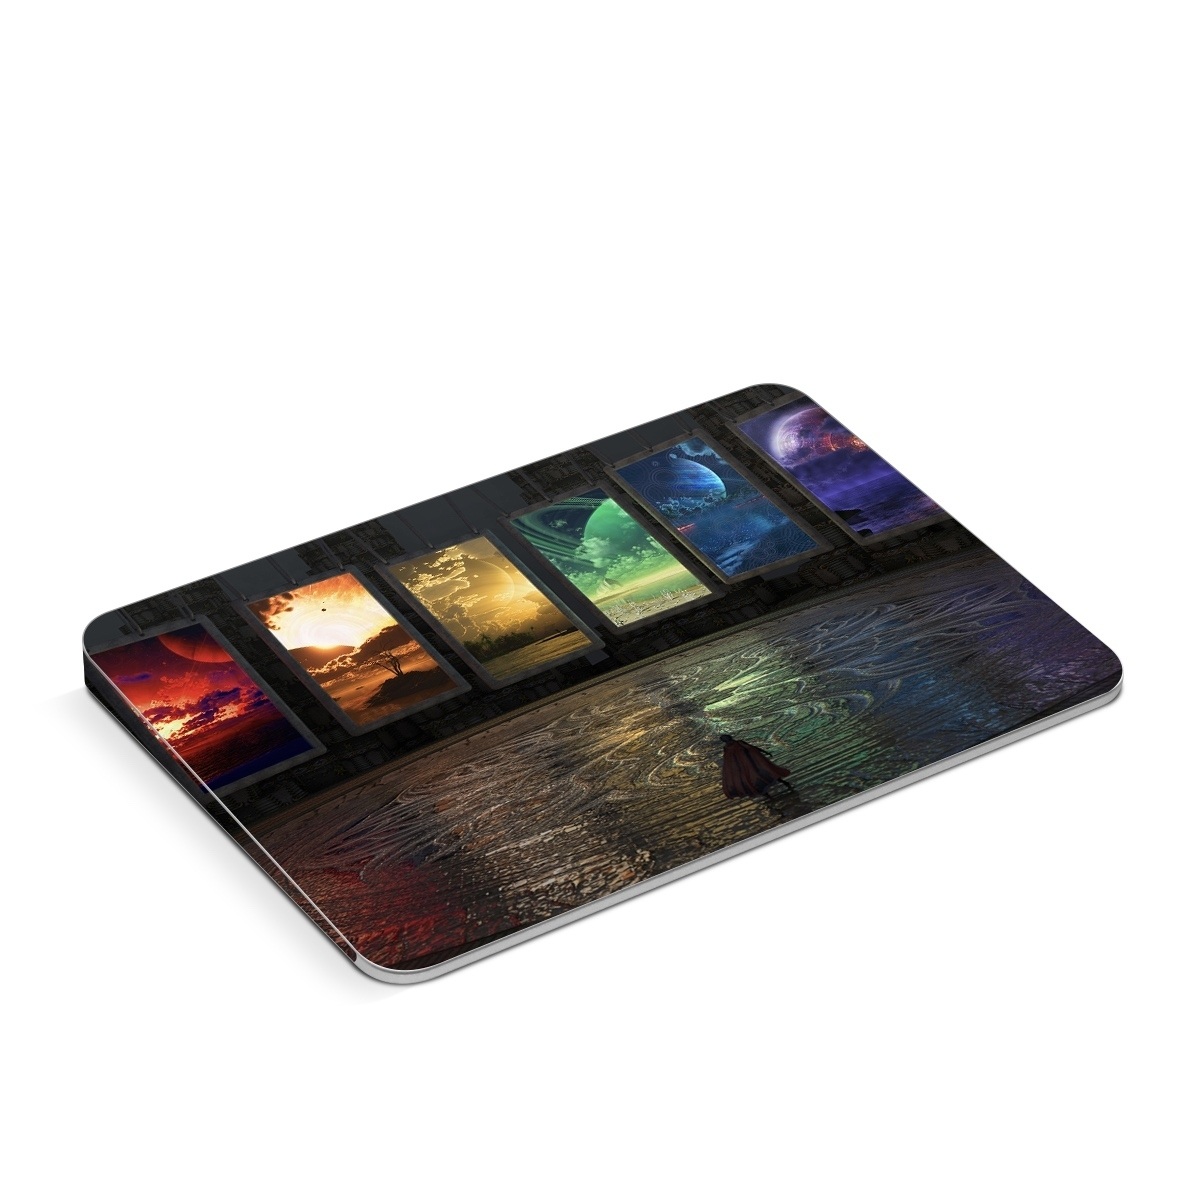 Apple Magic Trackpad Skin design of Light, Lighting, Water, Sky, Technology, Night, Art, Geological phenomenon, Electronic device, Glass, with black, red, green, blue colors